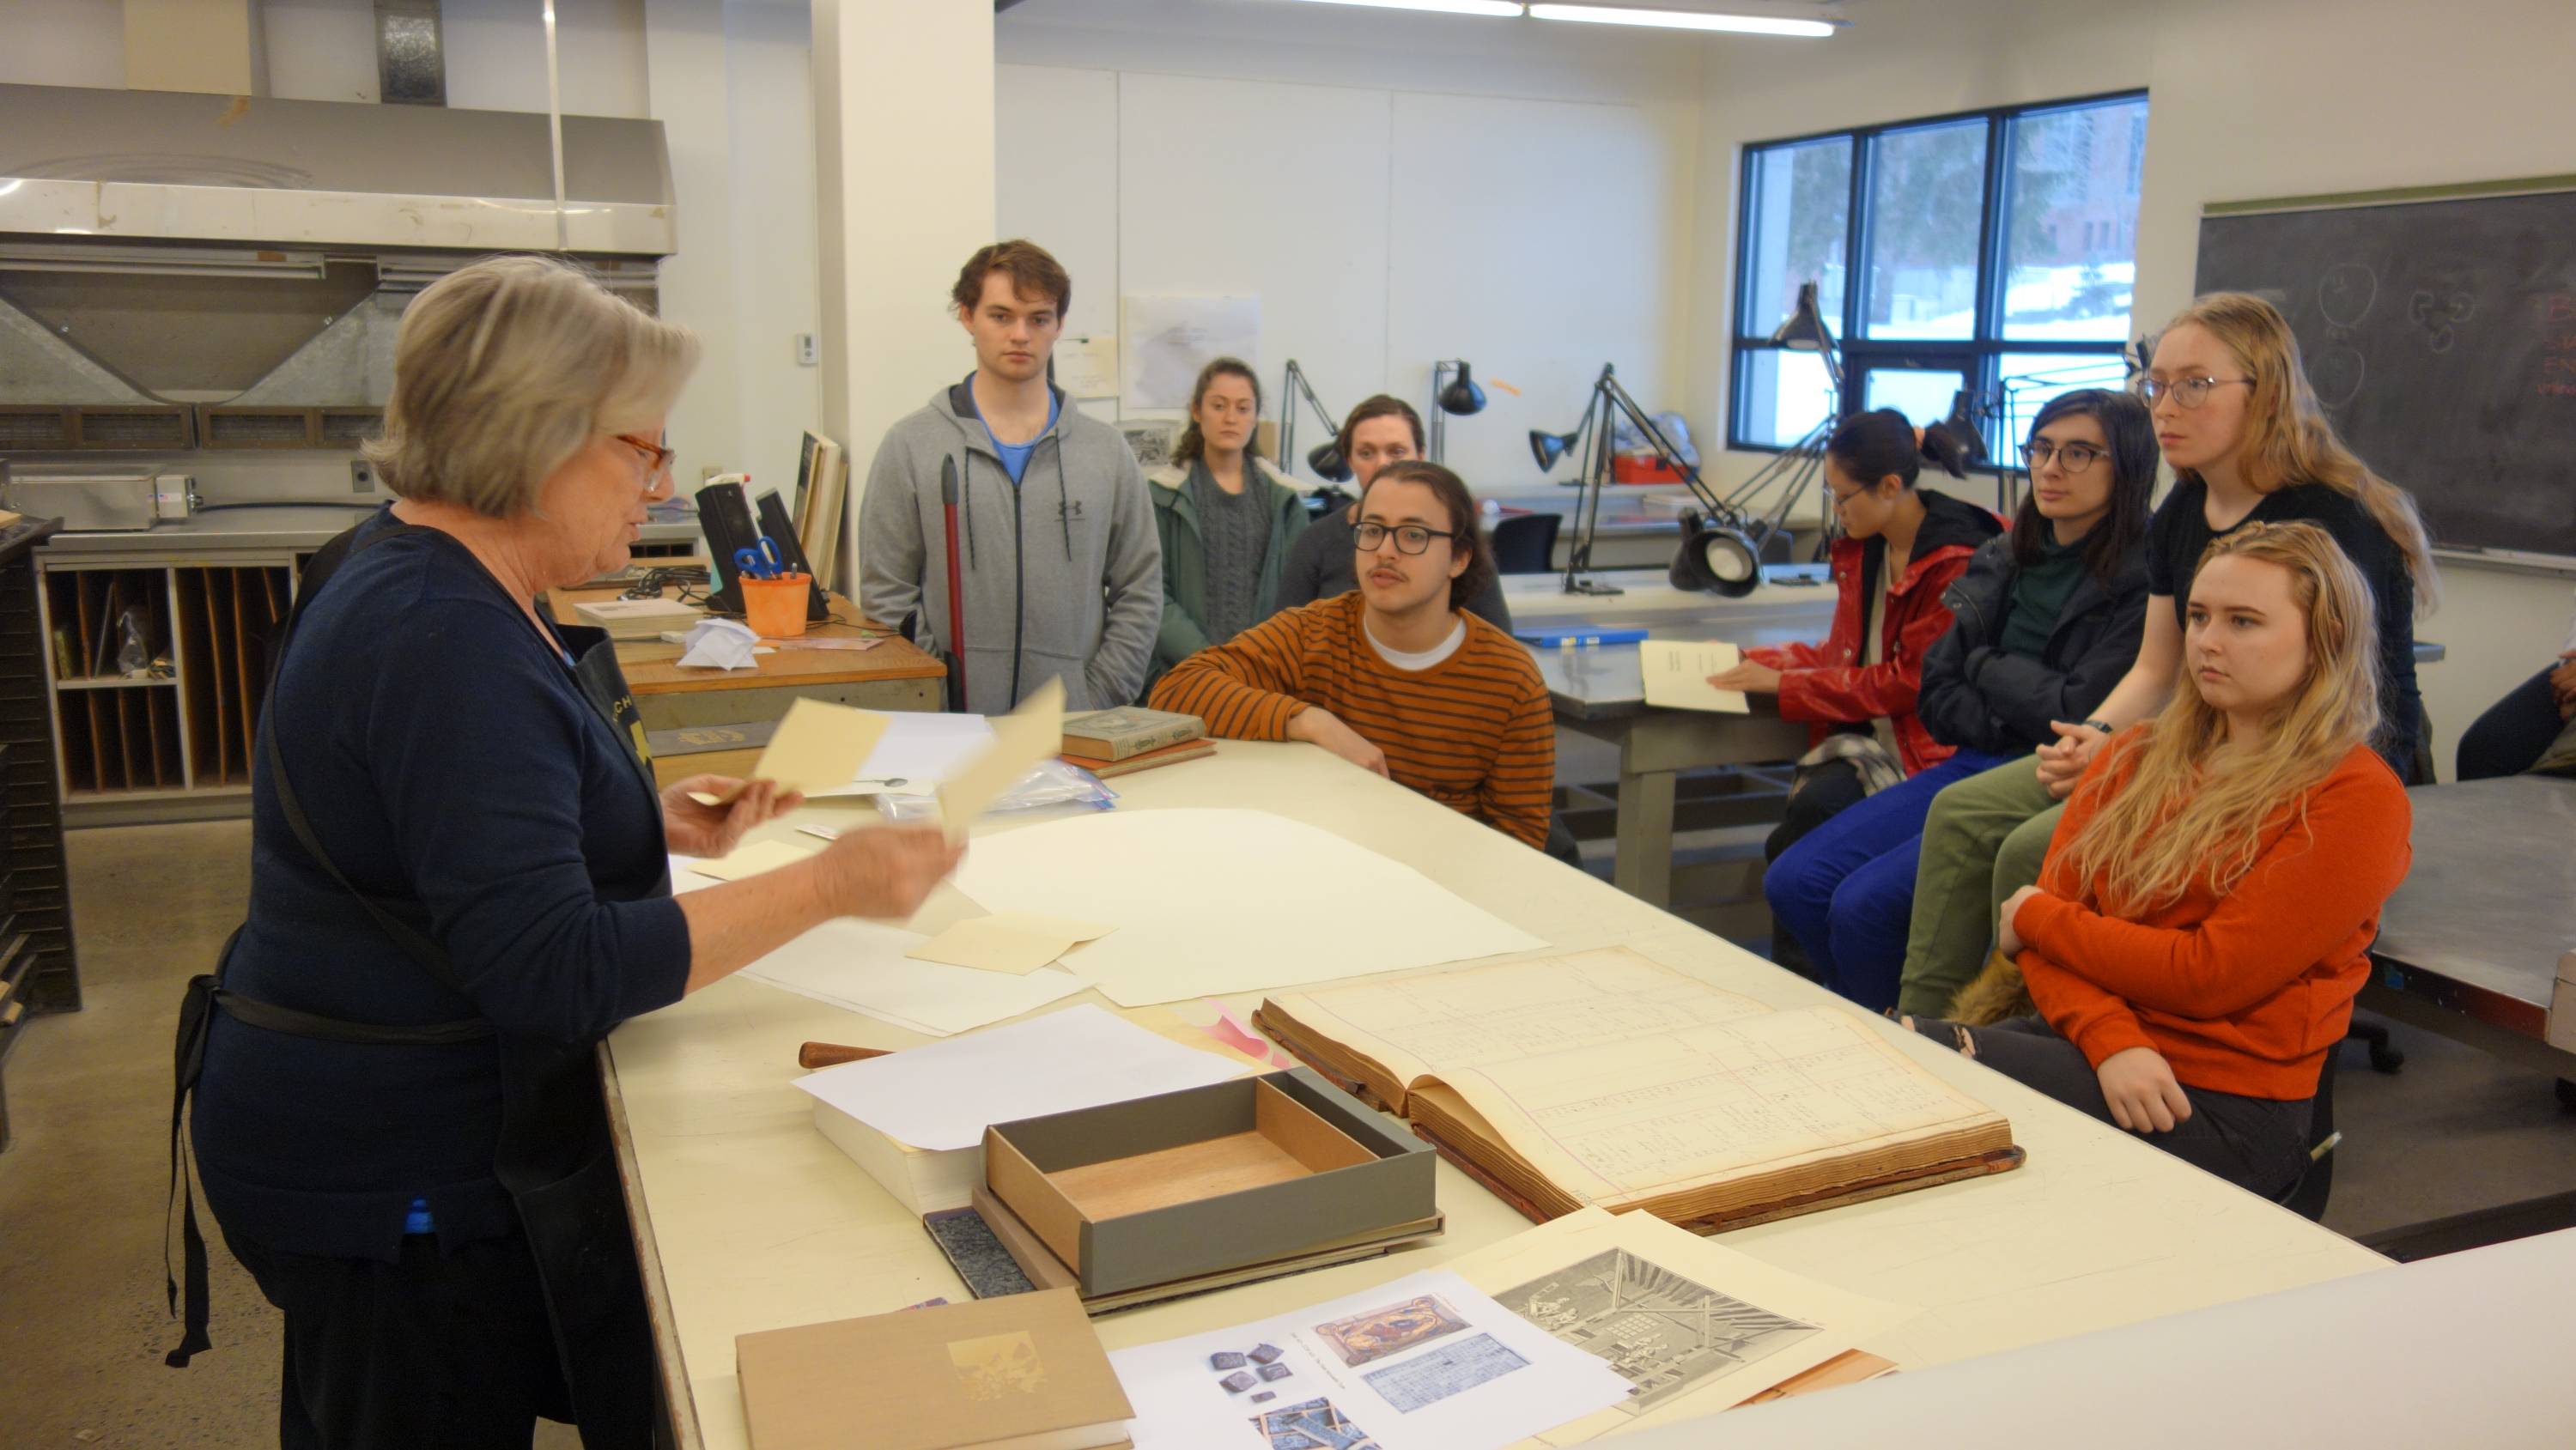 Skidmore College students gather at an IdeaLab Makerspace